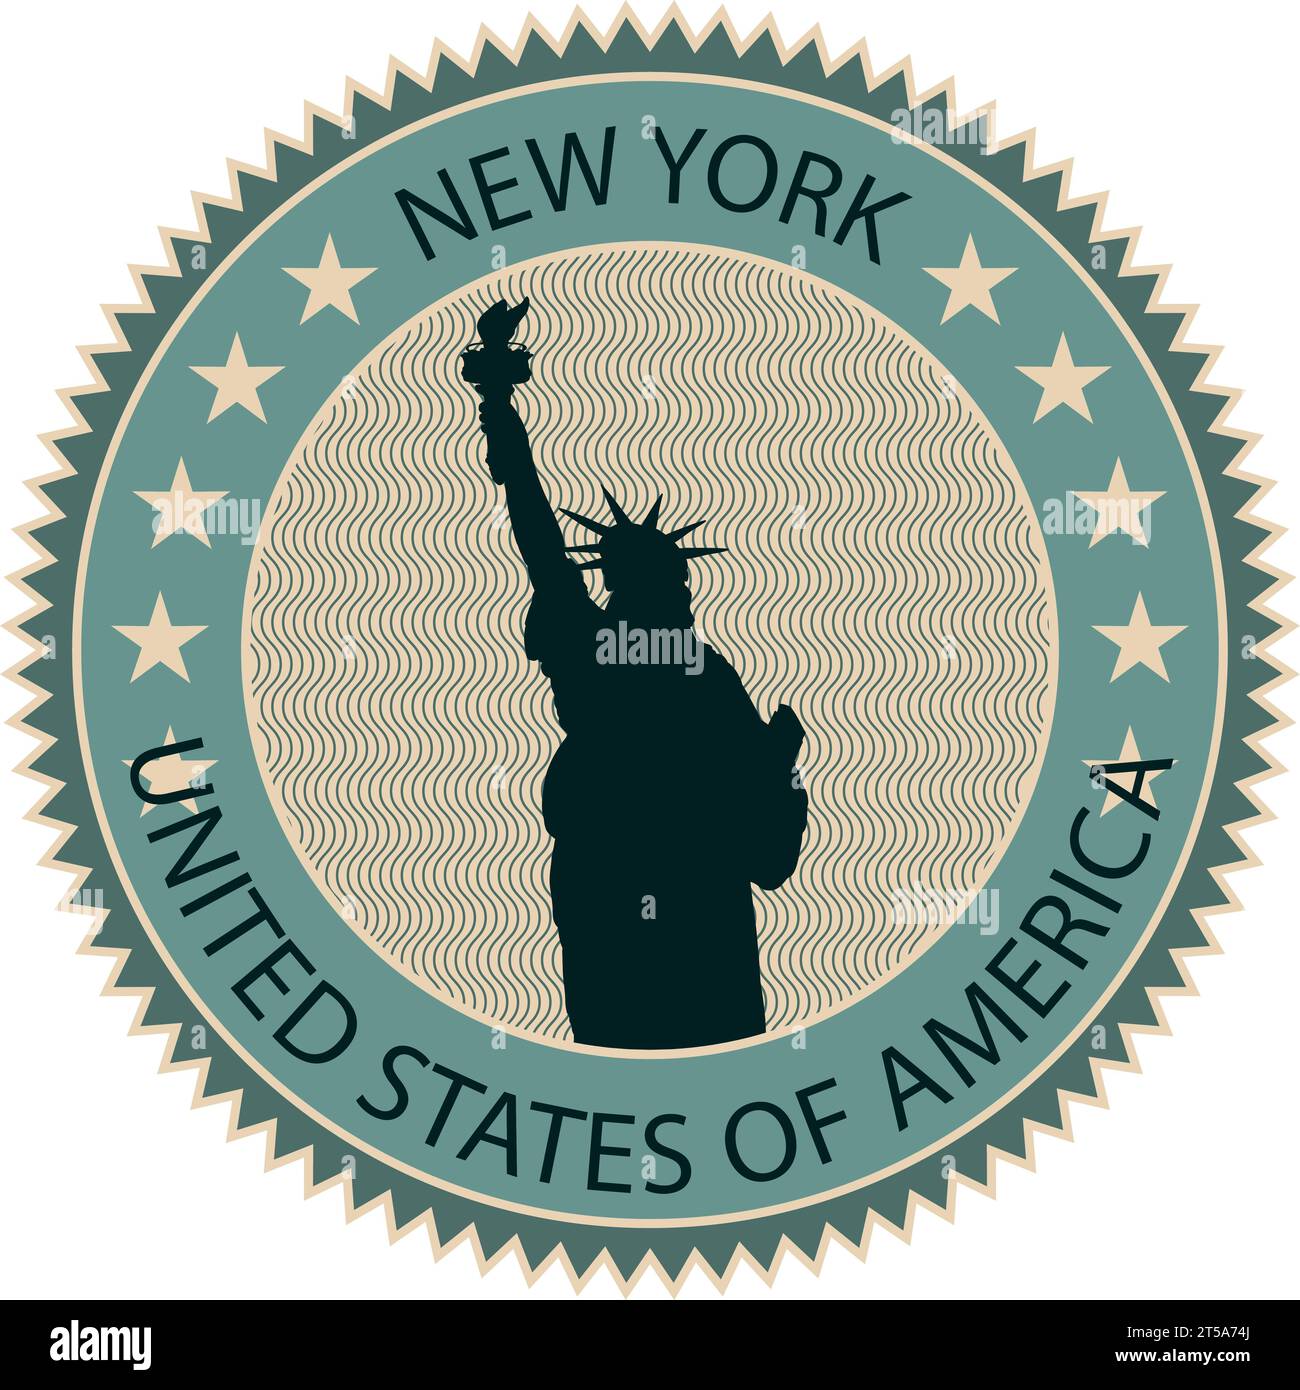 Seal (stamp) with STATUE OF LIBERTY famous landmark of NEW YORK CITY, UNITED STATES OF AMERICA Stock Vector